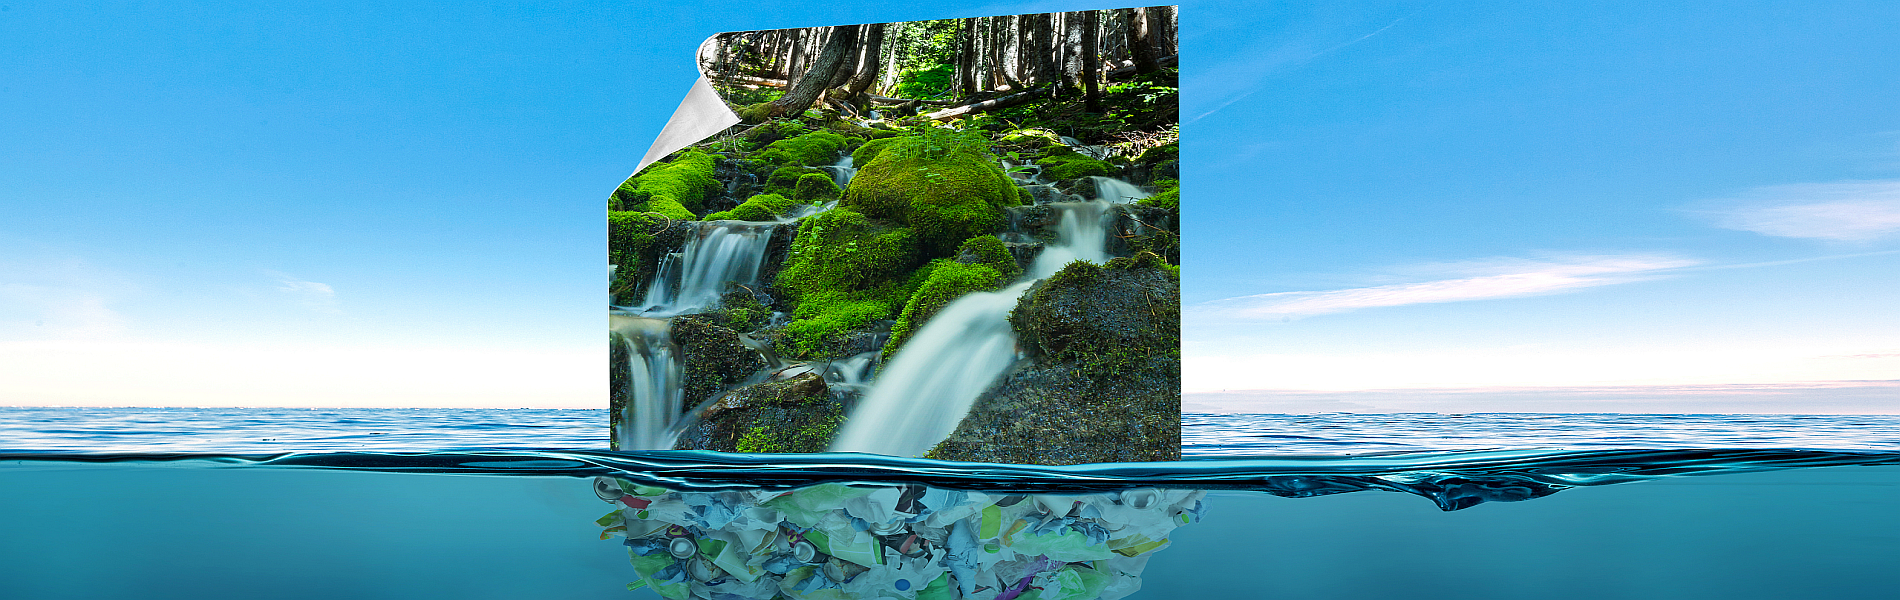 MOSS Grows Sustainable Product Portfolio with Innovative Ocean...